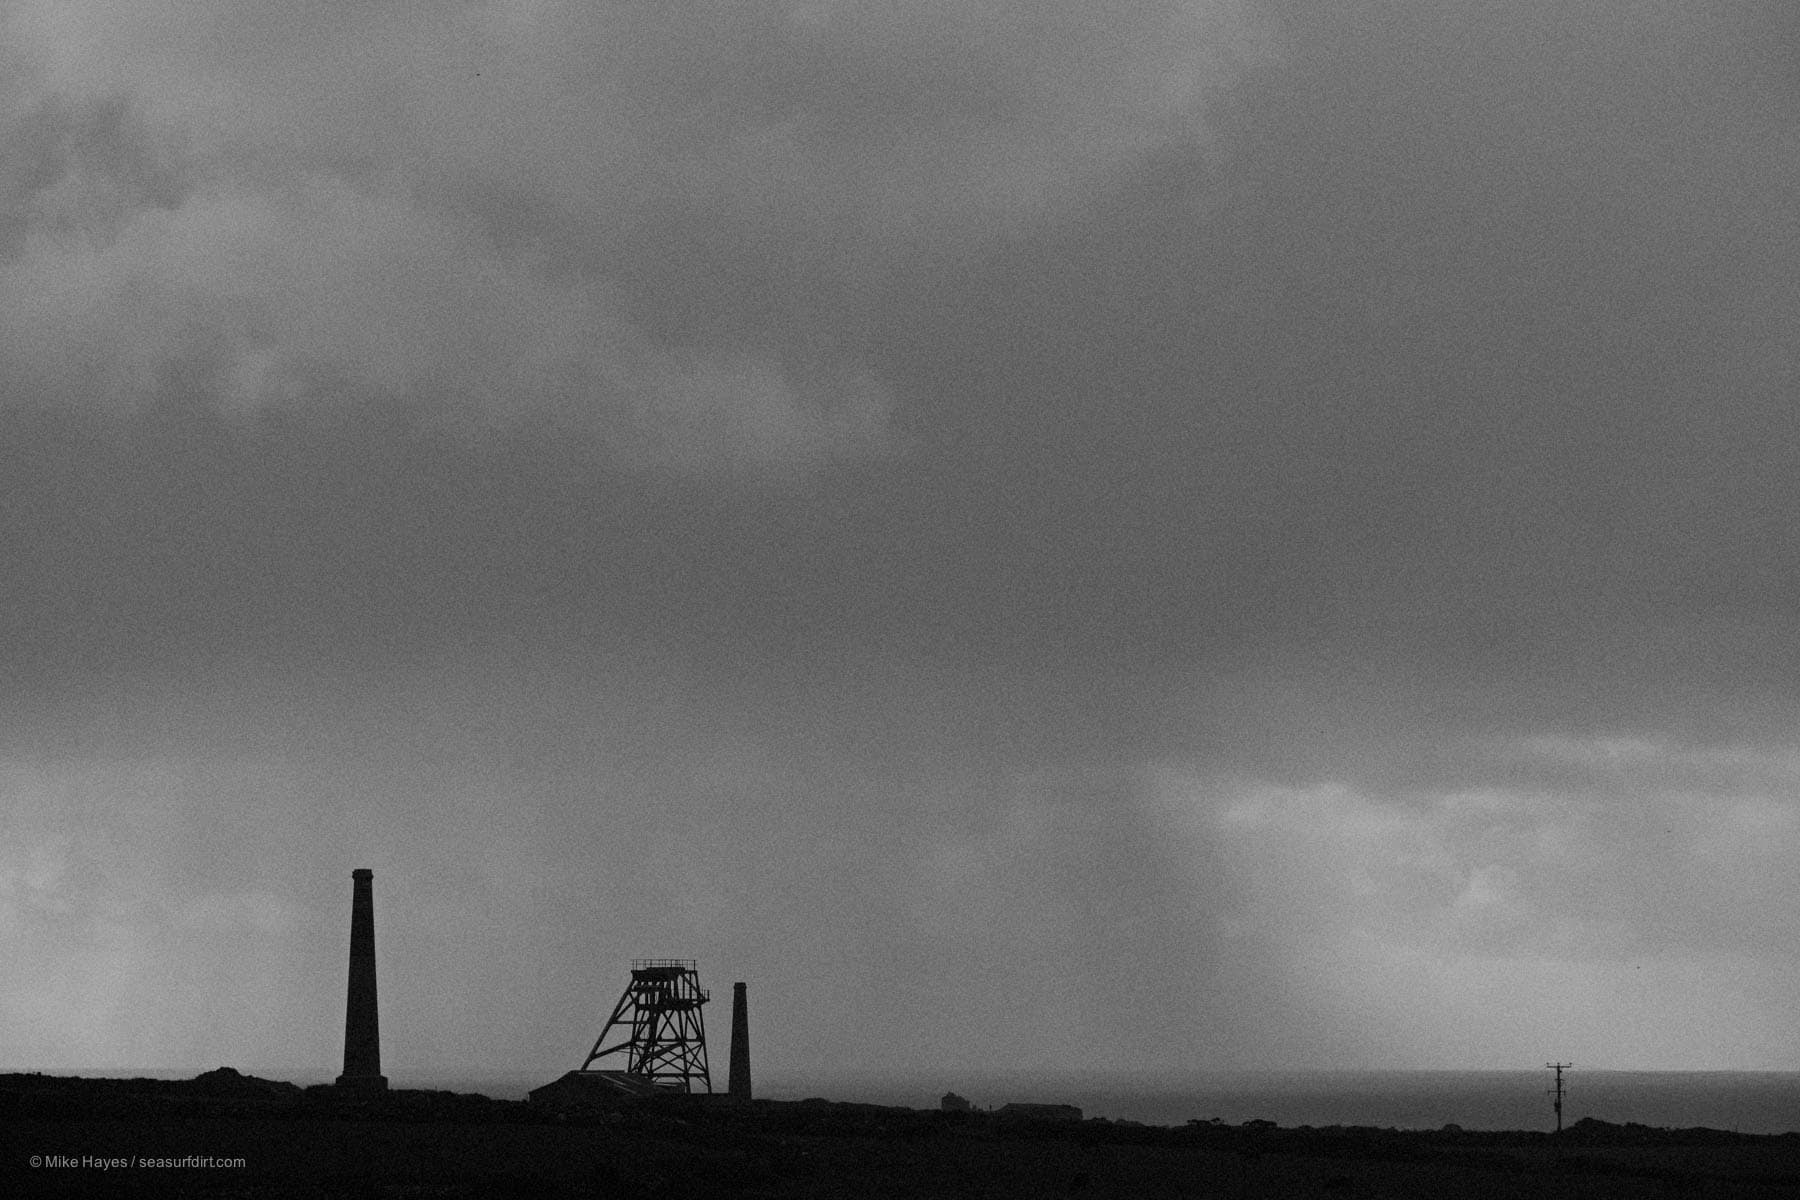 Mine workings in Penwith